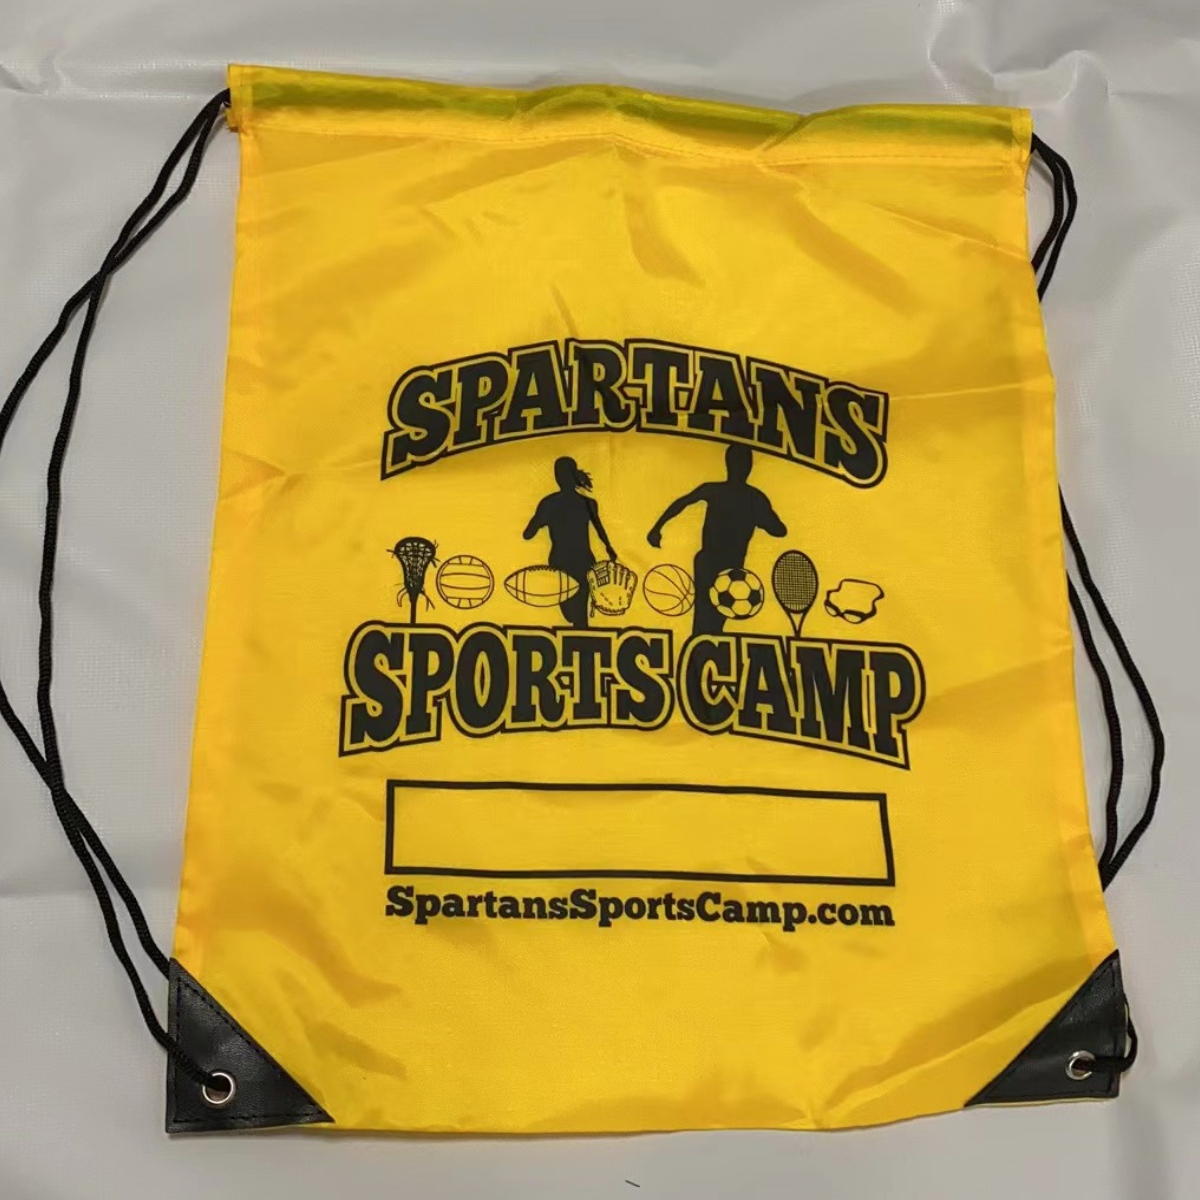 Get ready to conquer with fierce and stylish drawstring bags like Spartan Sports Camp! 🎒🏆 

Order yours now: 
(408) 275-9448
cs@nbnsports.com

#logos #brandingdesign #brand #printondemand #customizedproducts #commercialprinting #customizedapparel #marketing #bag #sports